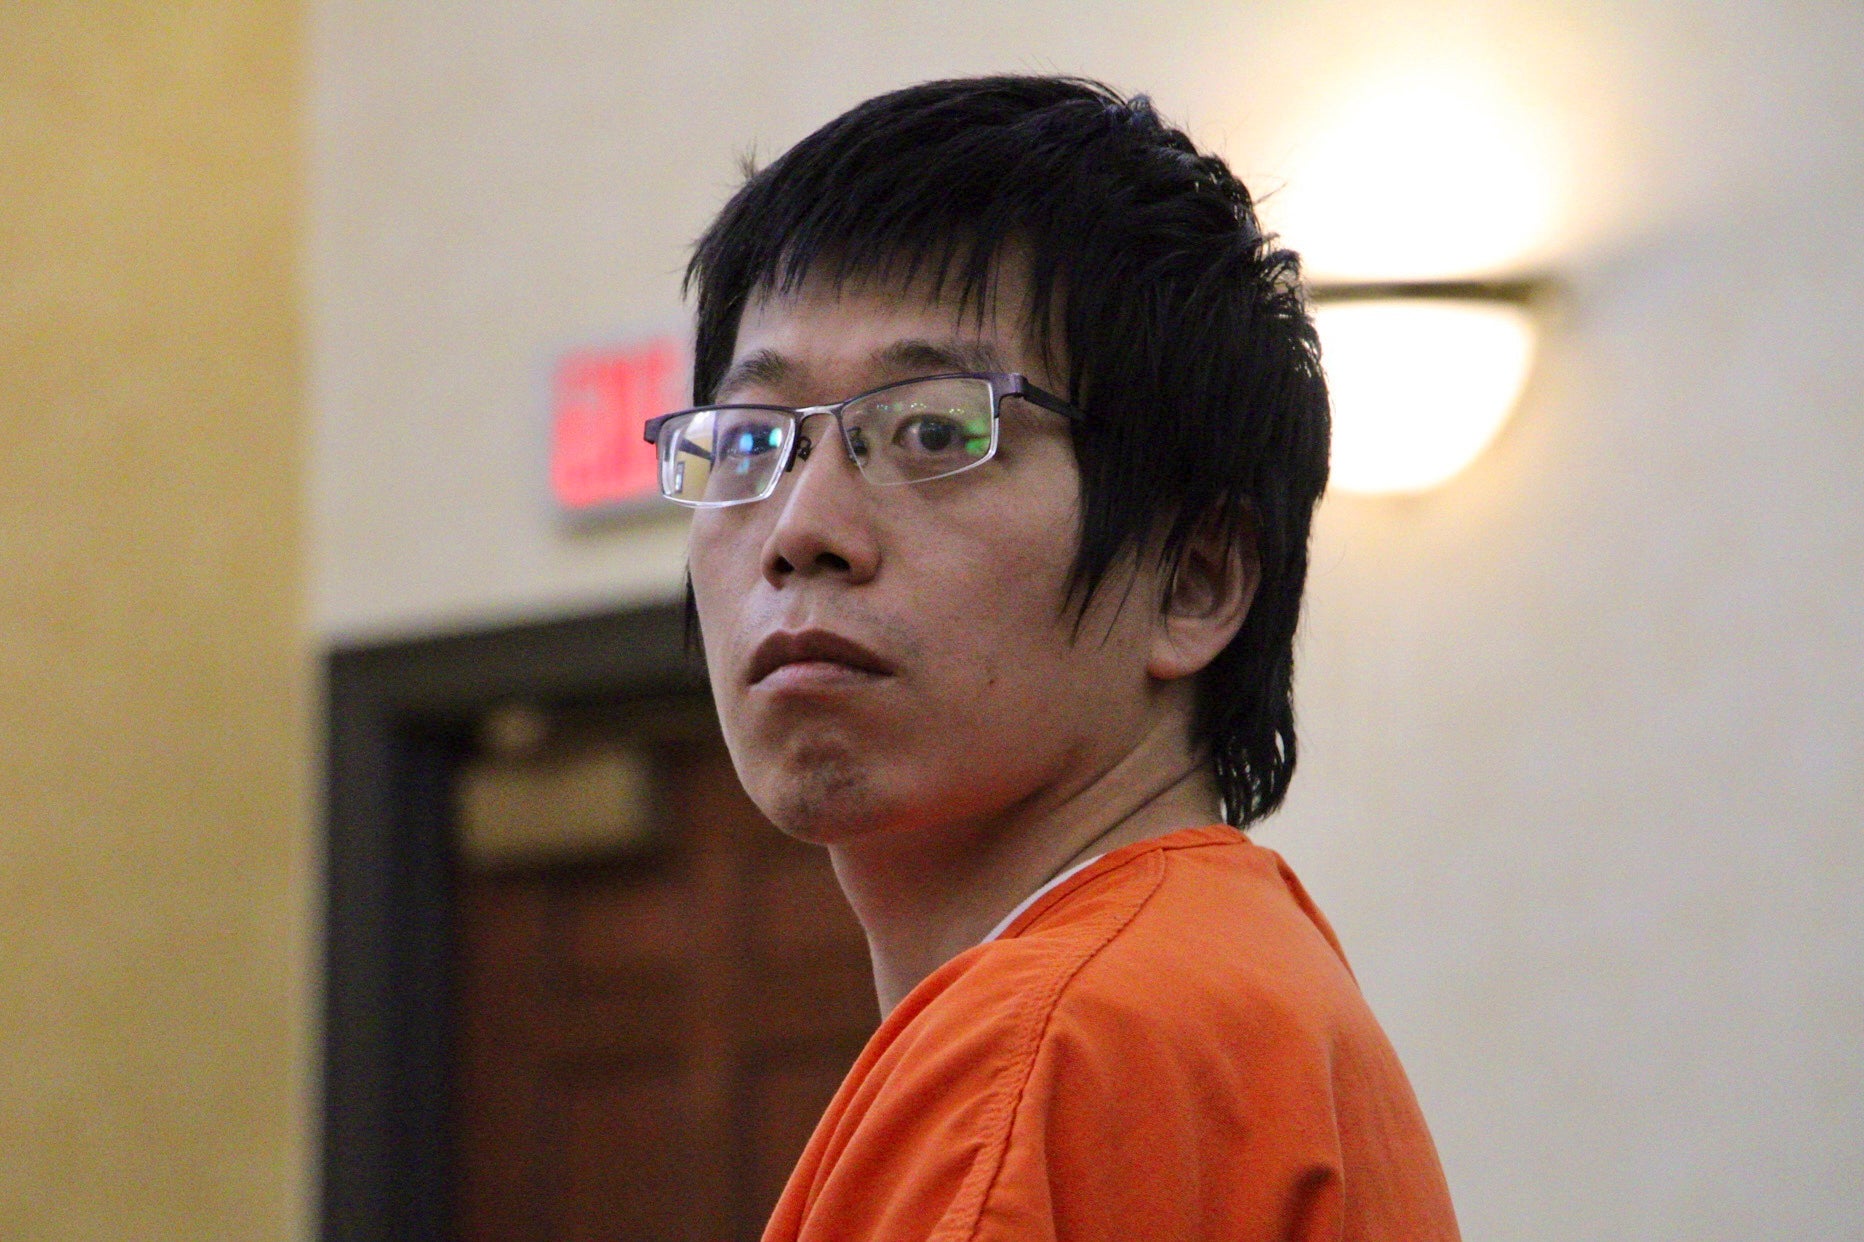 Tailei Qi, the graduate student suspected in the fatal shooting of a University of North Carolina at Chapel Hill faculty member